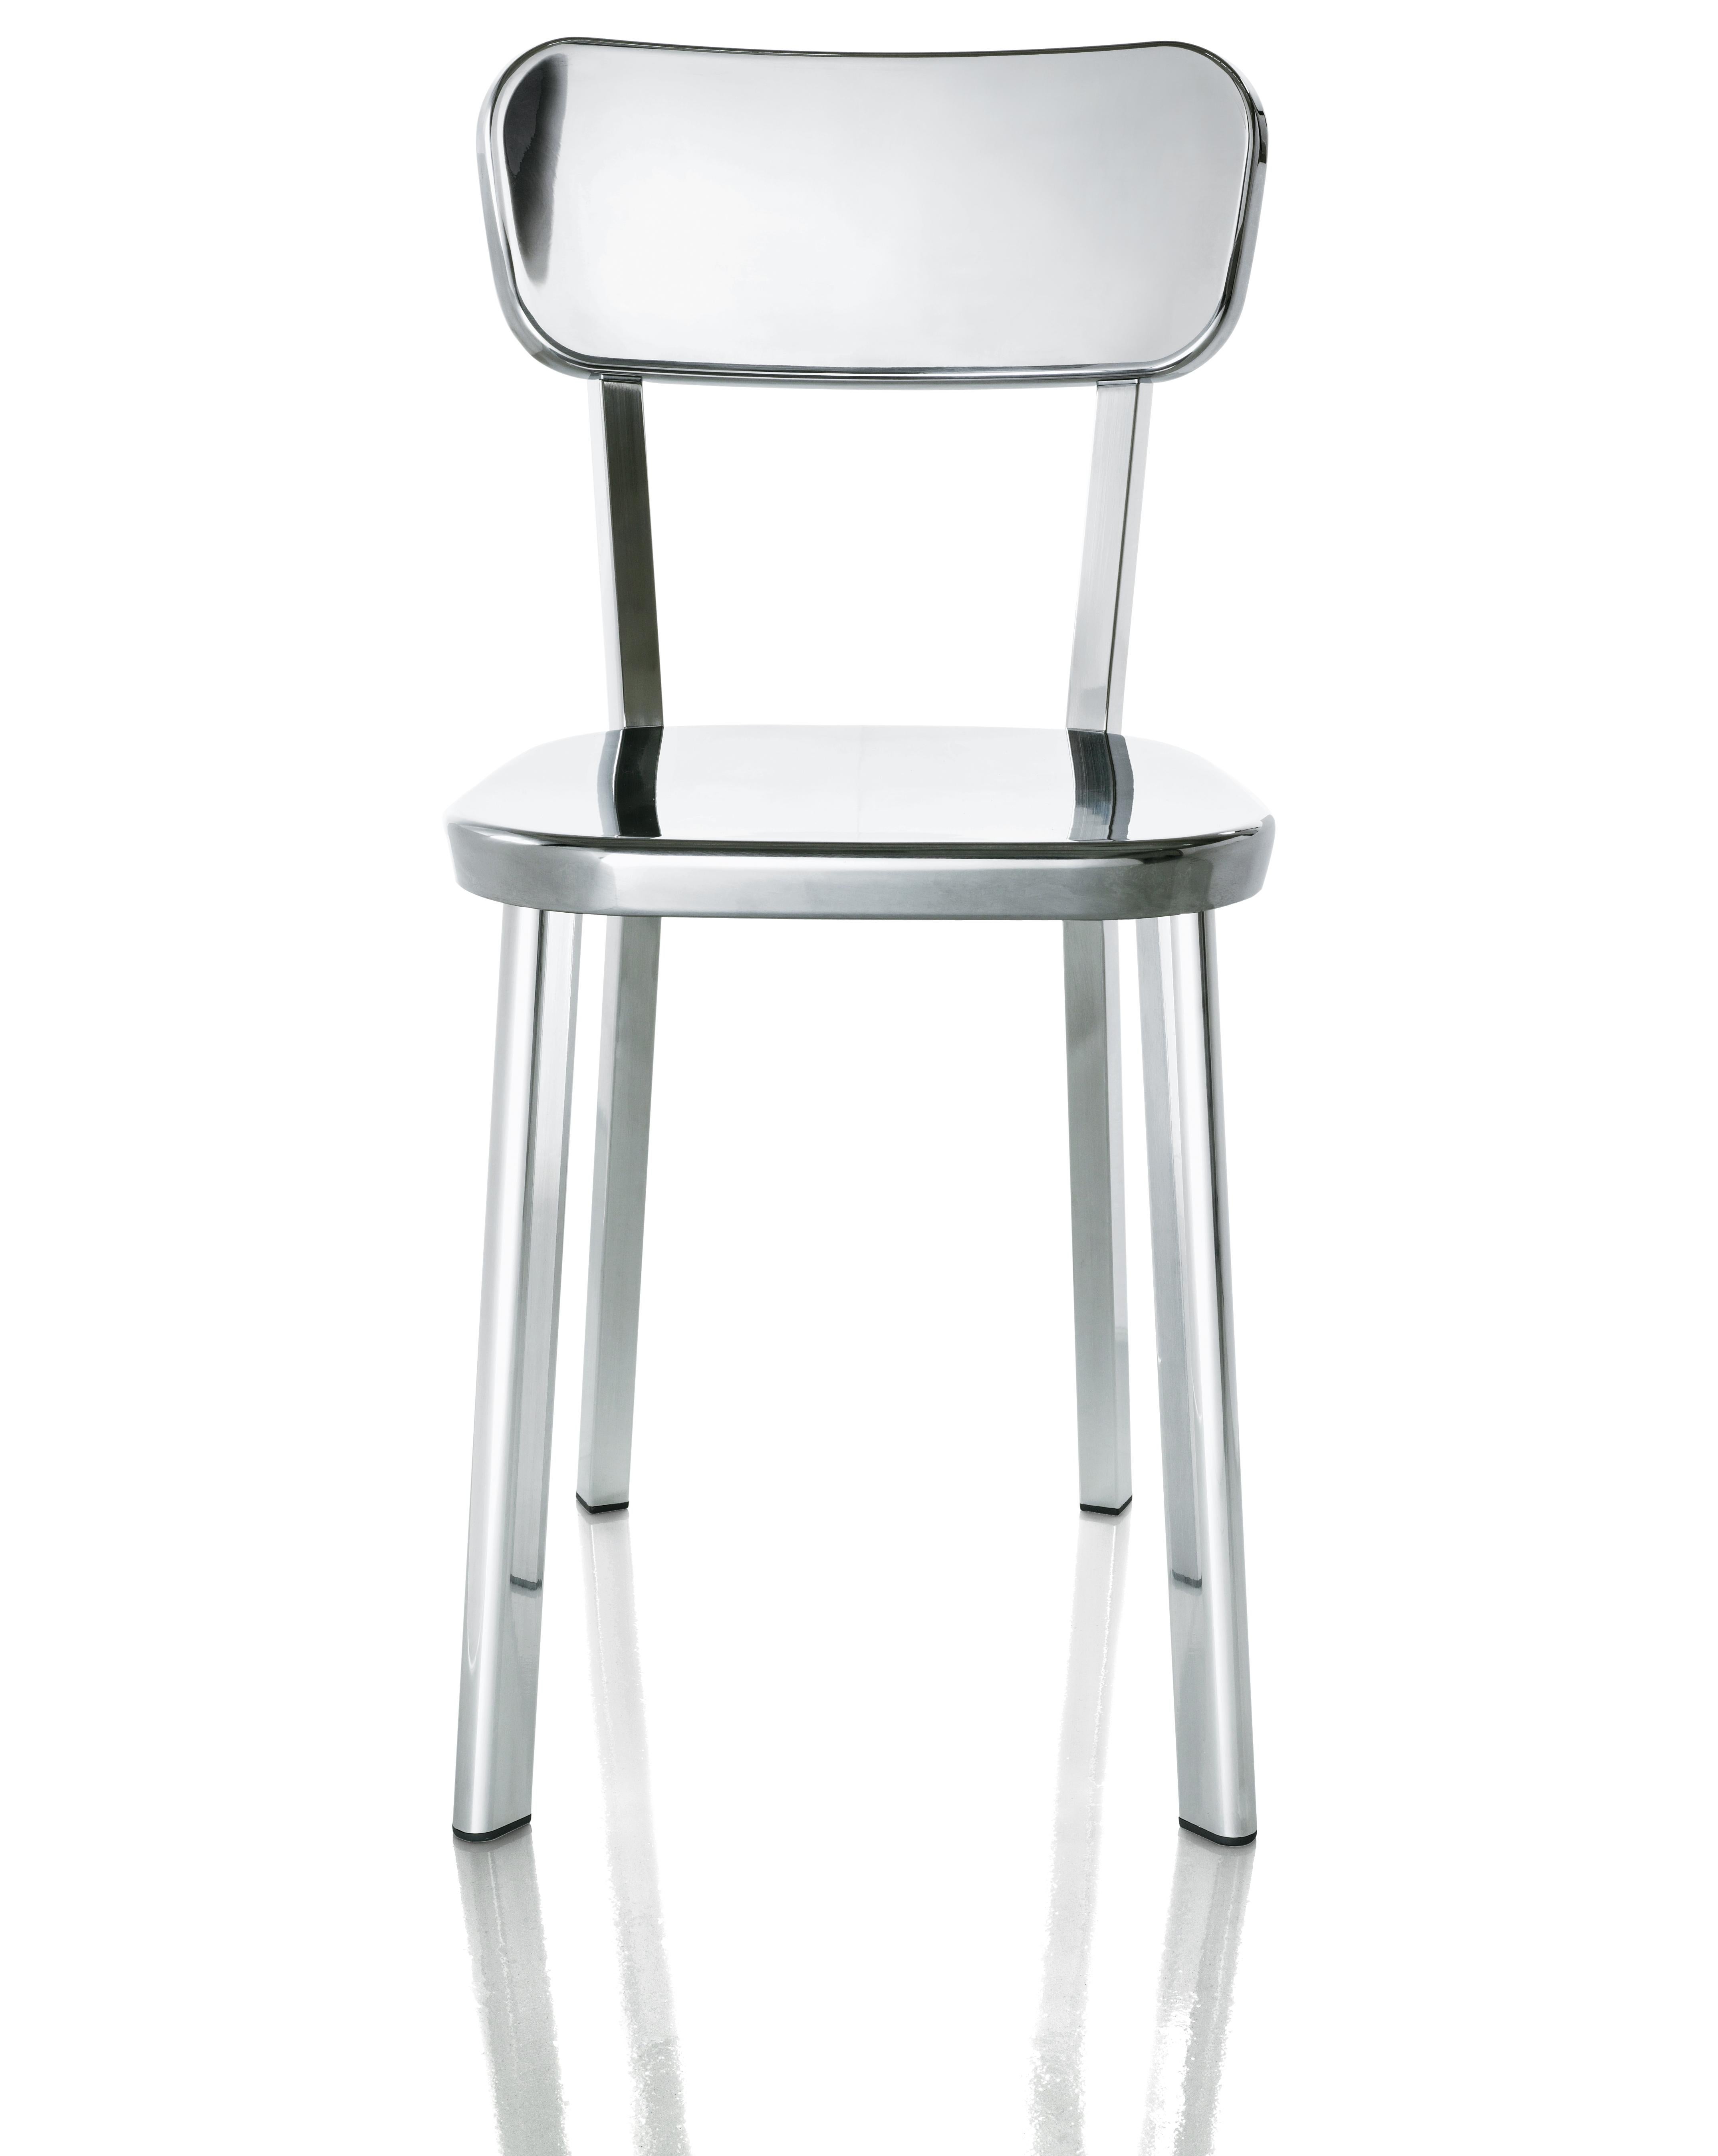 Déjà-vu: a simple, highly iconic stool with seat in die-cast aluminium and legs
in extruded aluminium, available both in polished and painted version (the latter suitable for outdoor use).
An object with a minimalist look which fits perfectly into